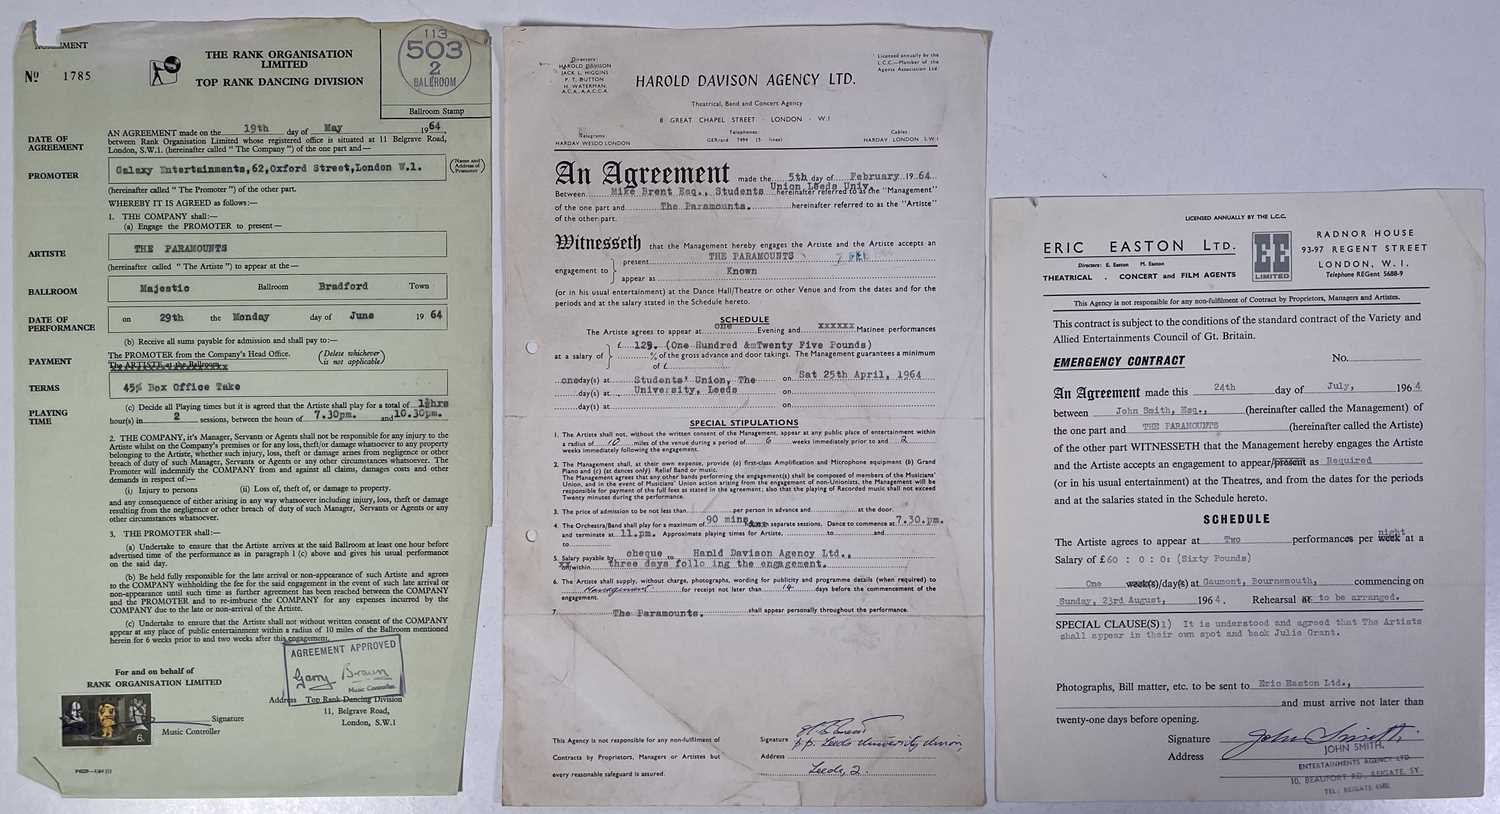 PROCOL HARUM INTEREST - THE PARAMOUNTS - 1964 BOOKING CONTRACTS.